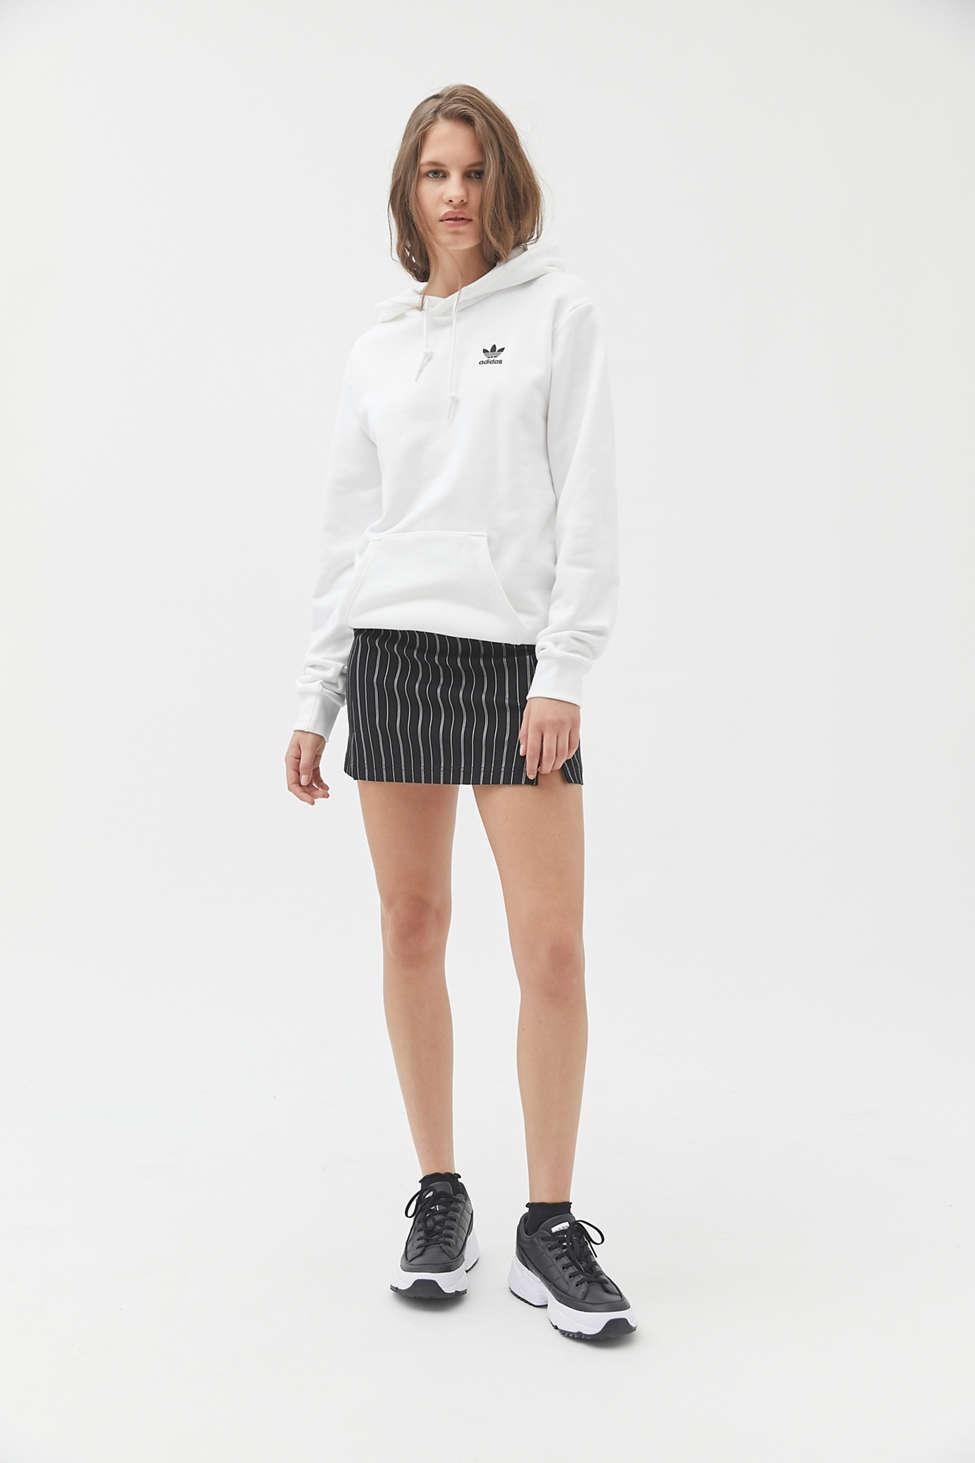 adidas The Brand With The 3 Stripes Hoodie Sweatshirt | Lyst